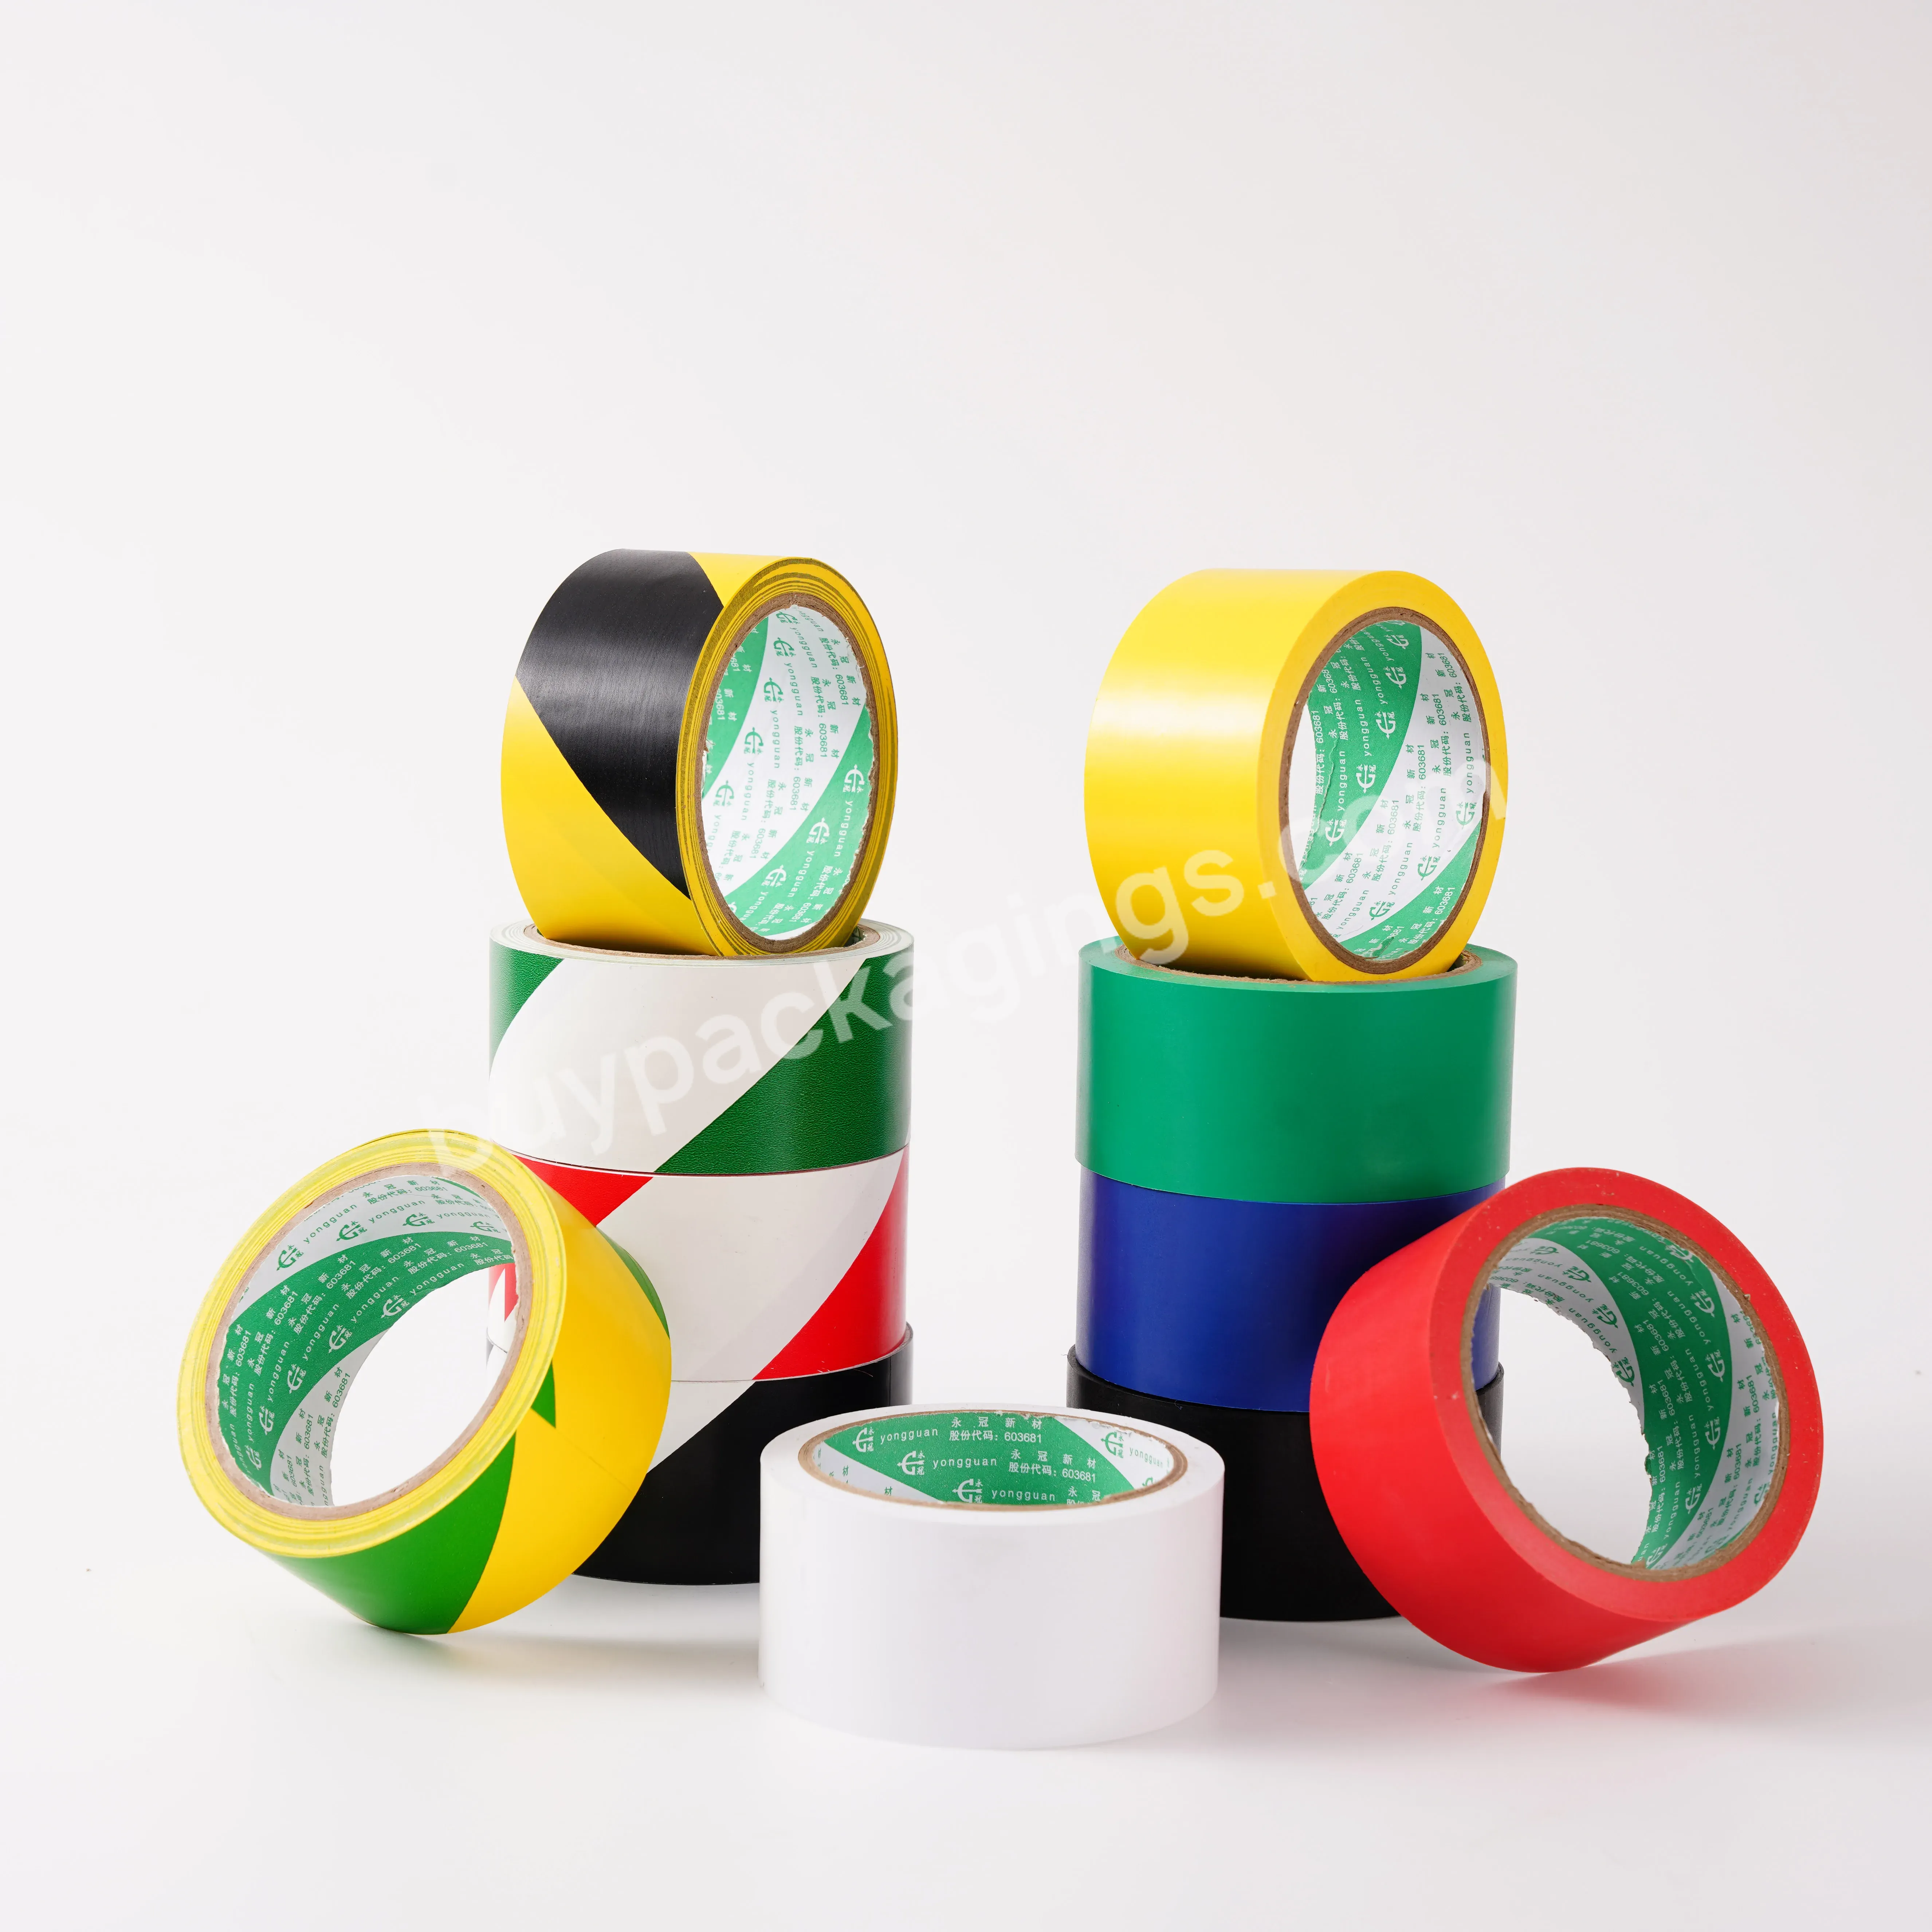 18m Tape For Warning Signs Are Pasted With Anti-skid Wear-resistant Zebra Marking Floor Tape - Buy Yellow And Black Caution Trail,Warning Floor Marking Tape,Pvc Hazard Lane Safety Warning Adhesive Safety Tape.